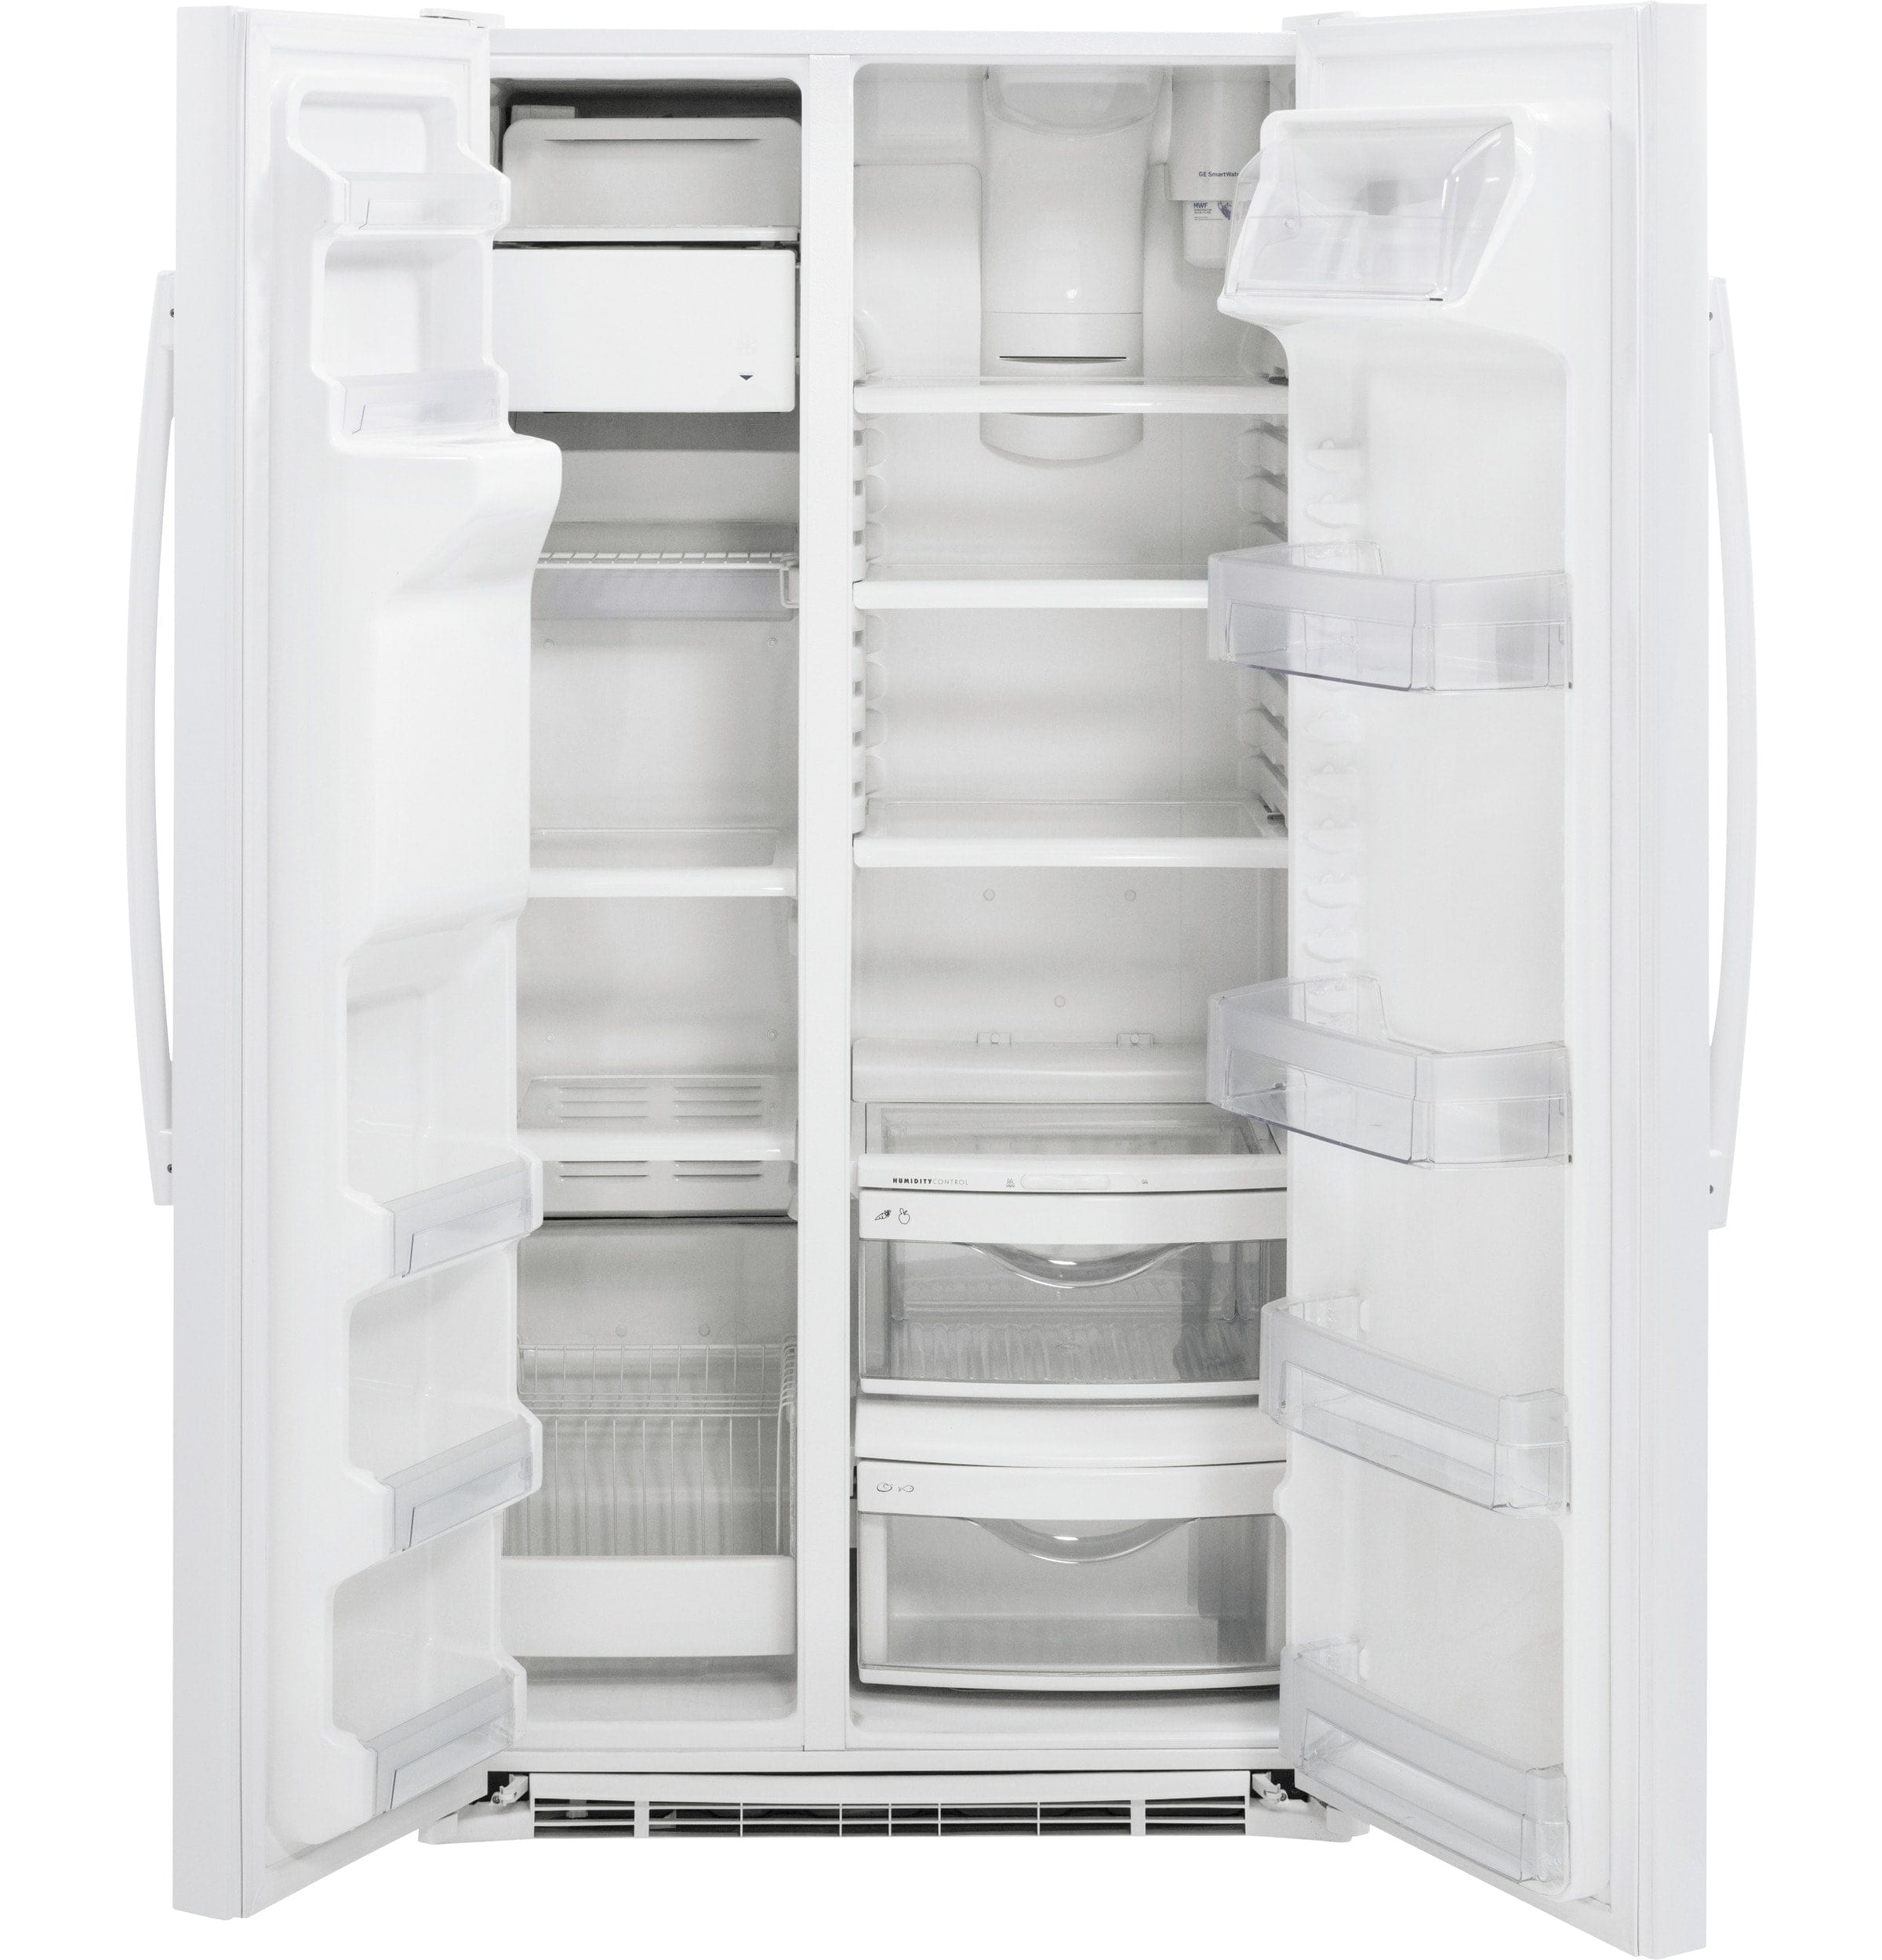 GE 21.9 Cu. Ft. Side-by-Side Counter-Depth Refrigerator White ...